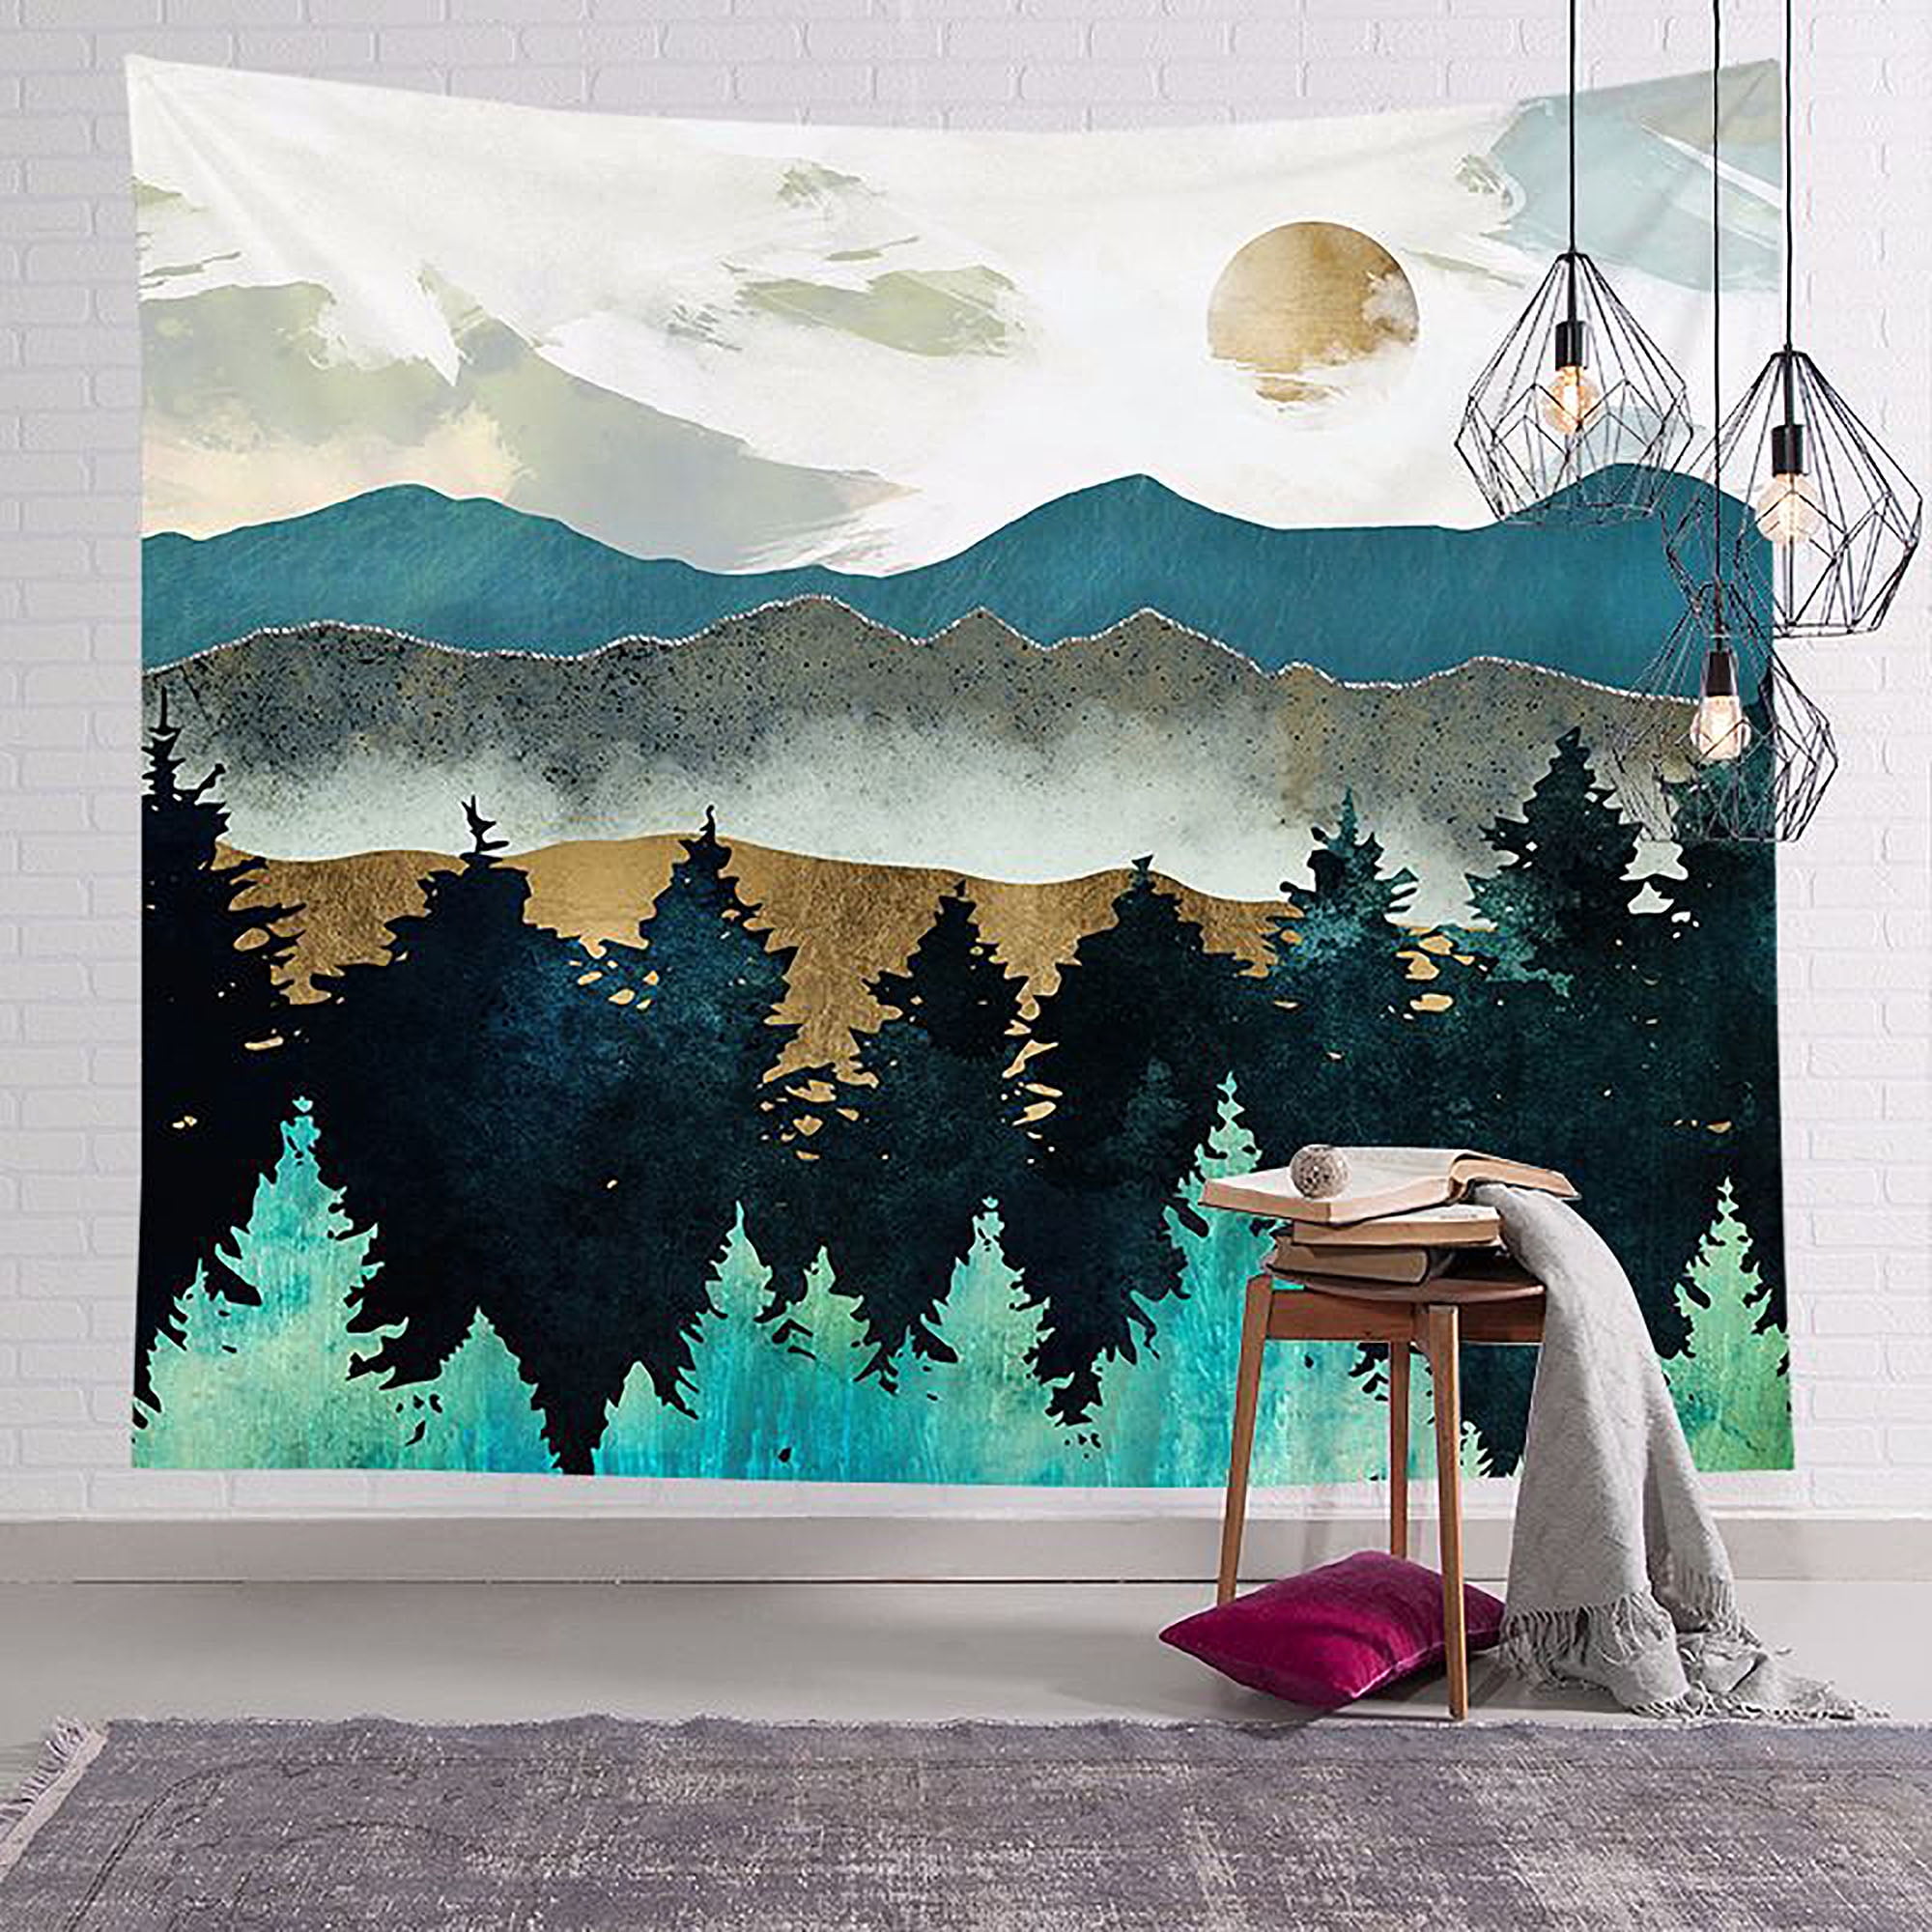 Seasonal Forest Landscape Cloth Painting Bedroom Decor Art Tapestry Wall Hanging 